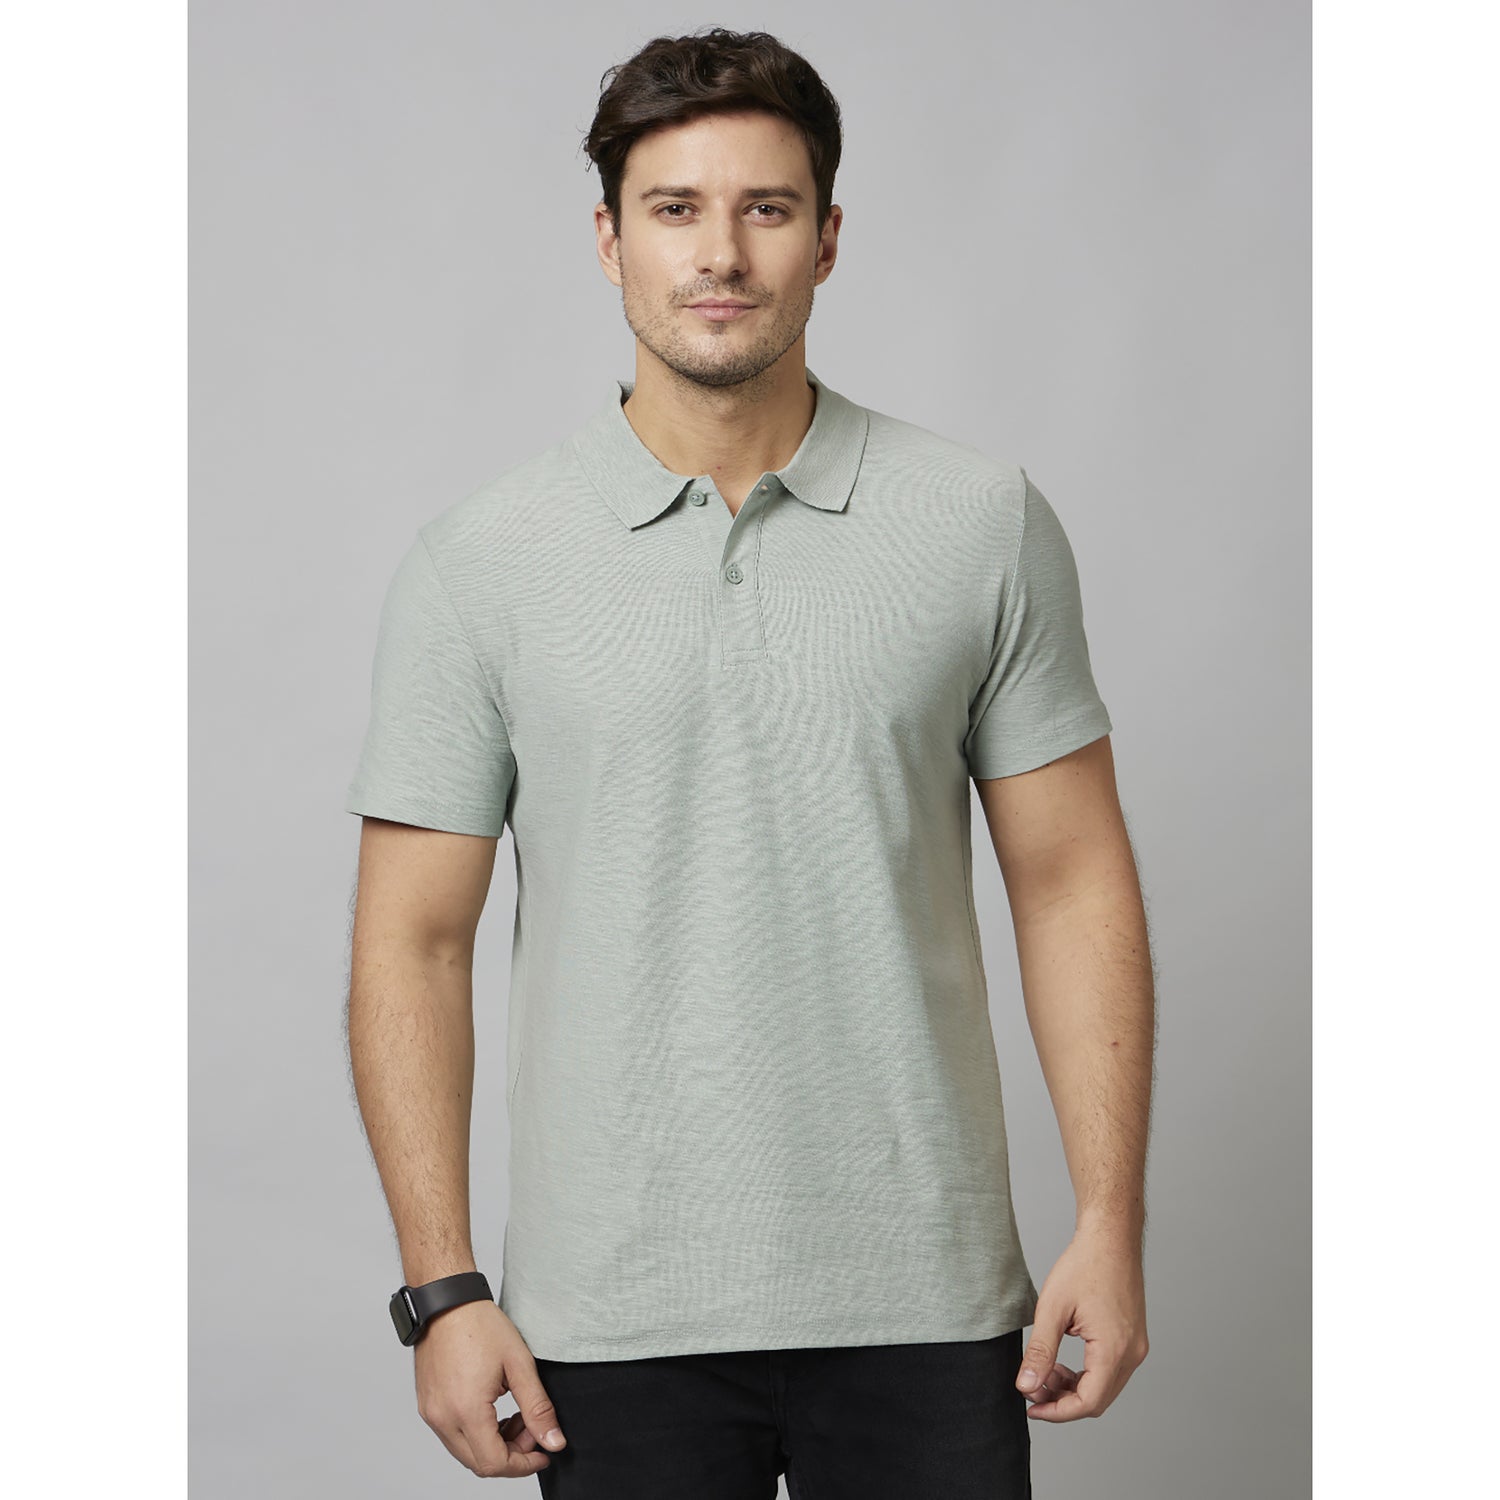 Grey Solid Short Sleeve Cotton T-Shirts (FEFLAME)